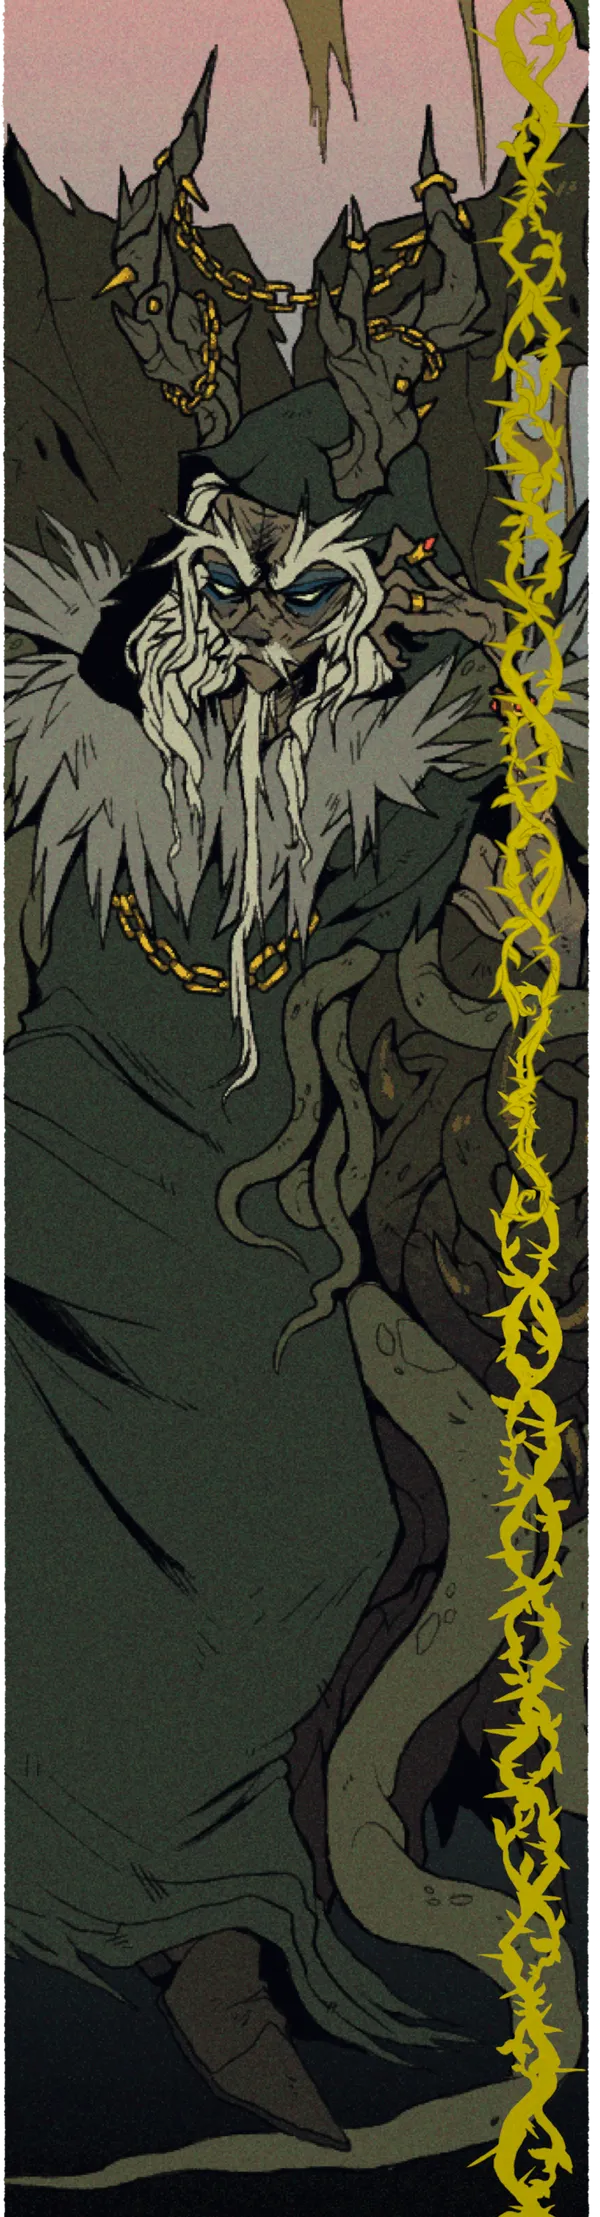 An ominous figure sitting upon a gnarled throne. The figure has deep grey skin, long white hair, and a menacing look. They are dressed in a long greyish green robe with fur lining their collar. They have two large gnarled antlers with gold chains looping through them. The figure appaers to have tentacles or vines coming out from around their robe.